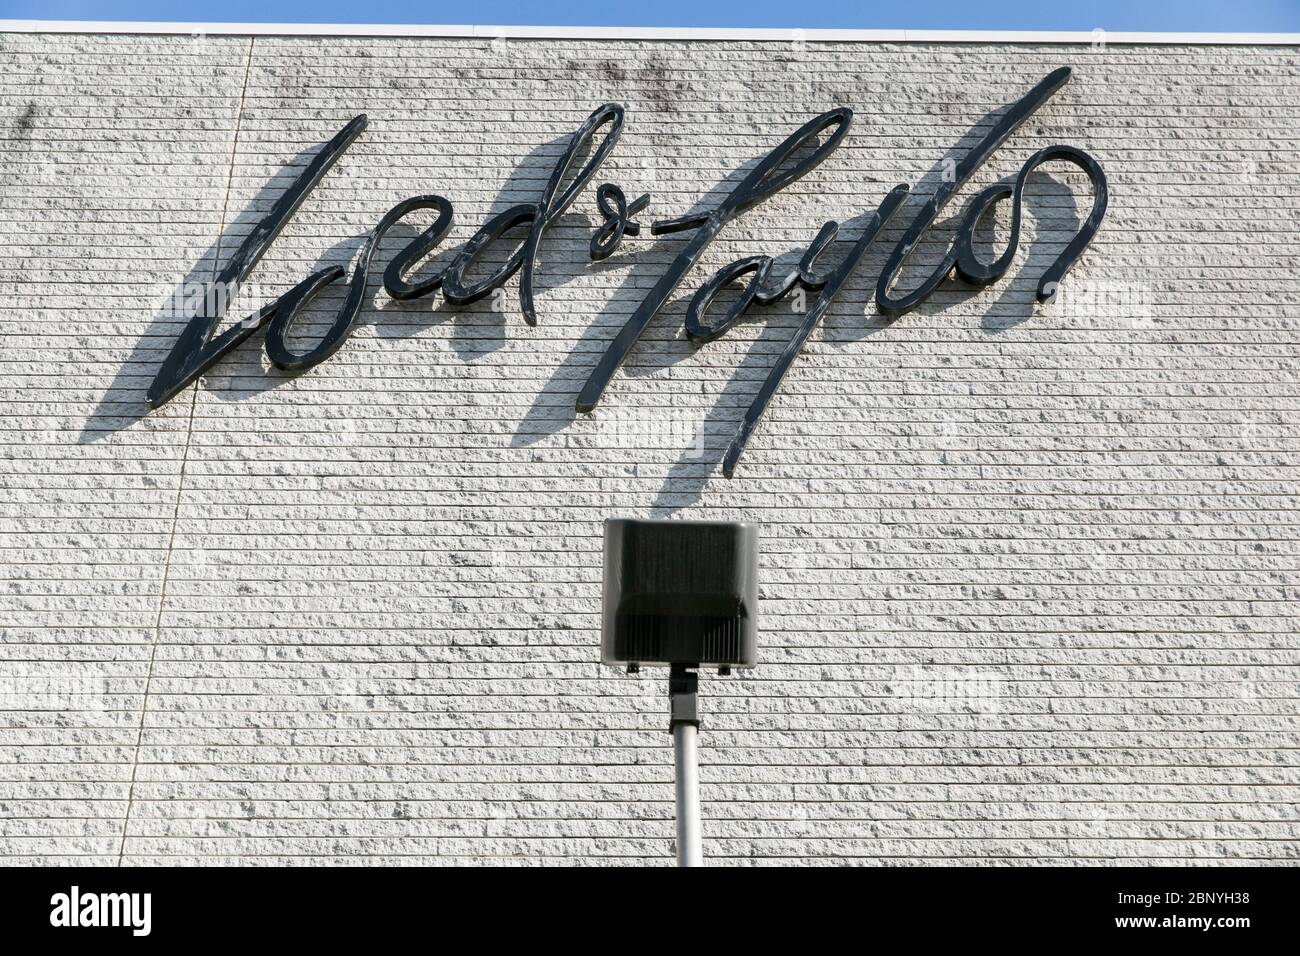 Lord and taylor department store hi-res stock photography and